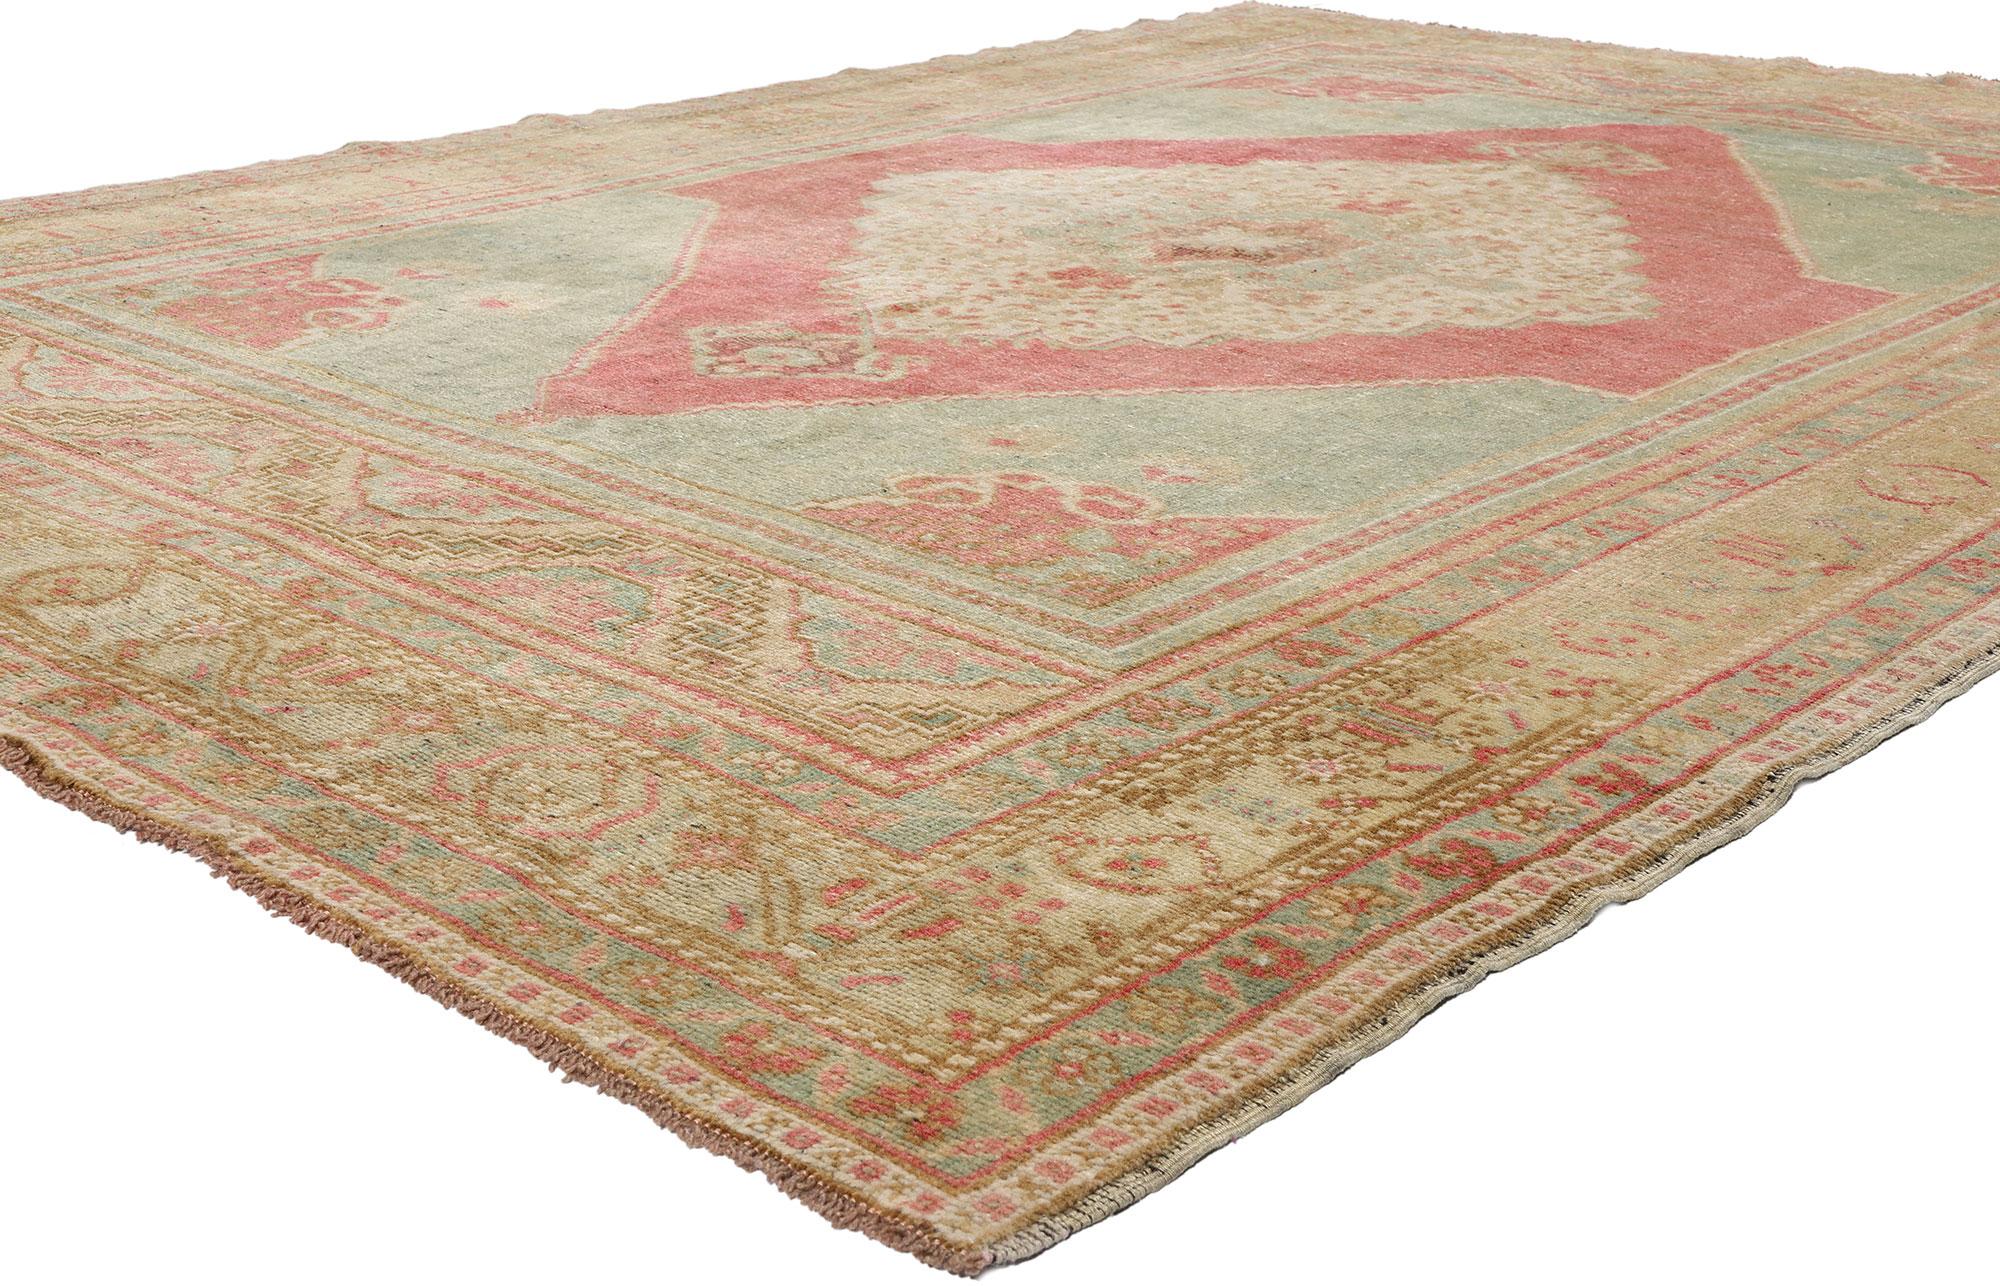 53889 Vintage Turkish Oushak Rug, 06'03 x 09'08. Emerging from the Western expanse of Oushak in Turkey, Turkish Oushak rugs have garnered widespread admiration for their intricate patterns, gentle color schemes, and premium wool materials.